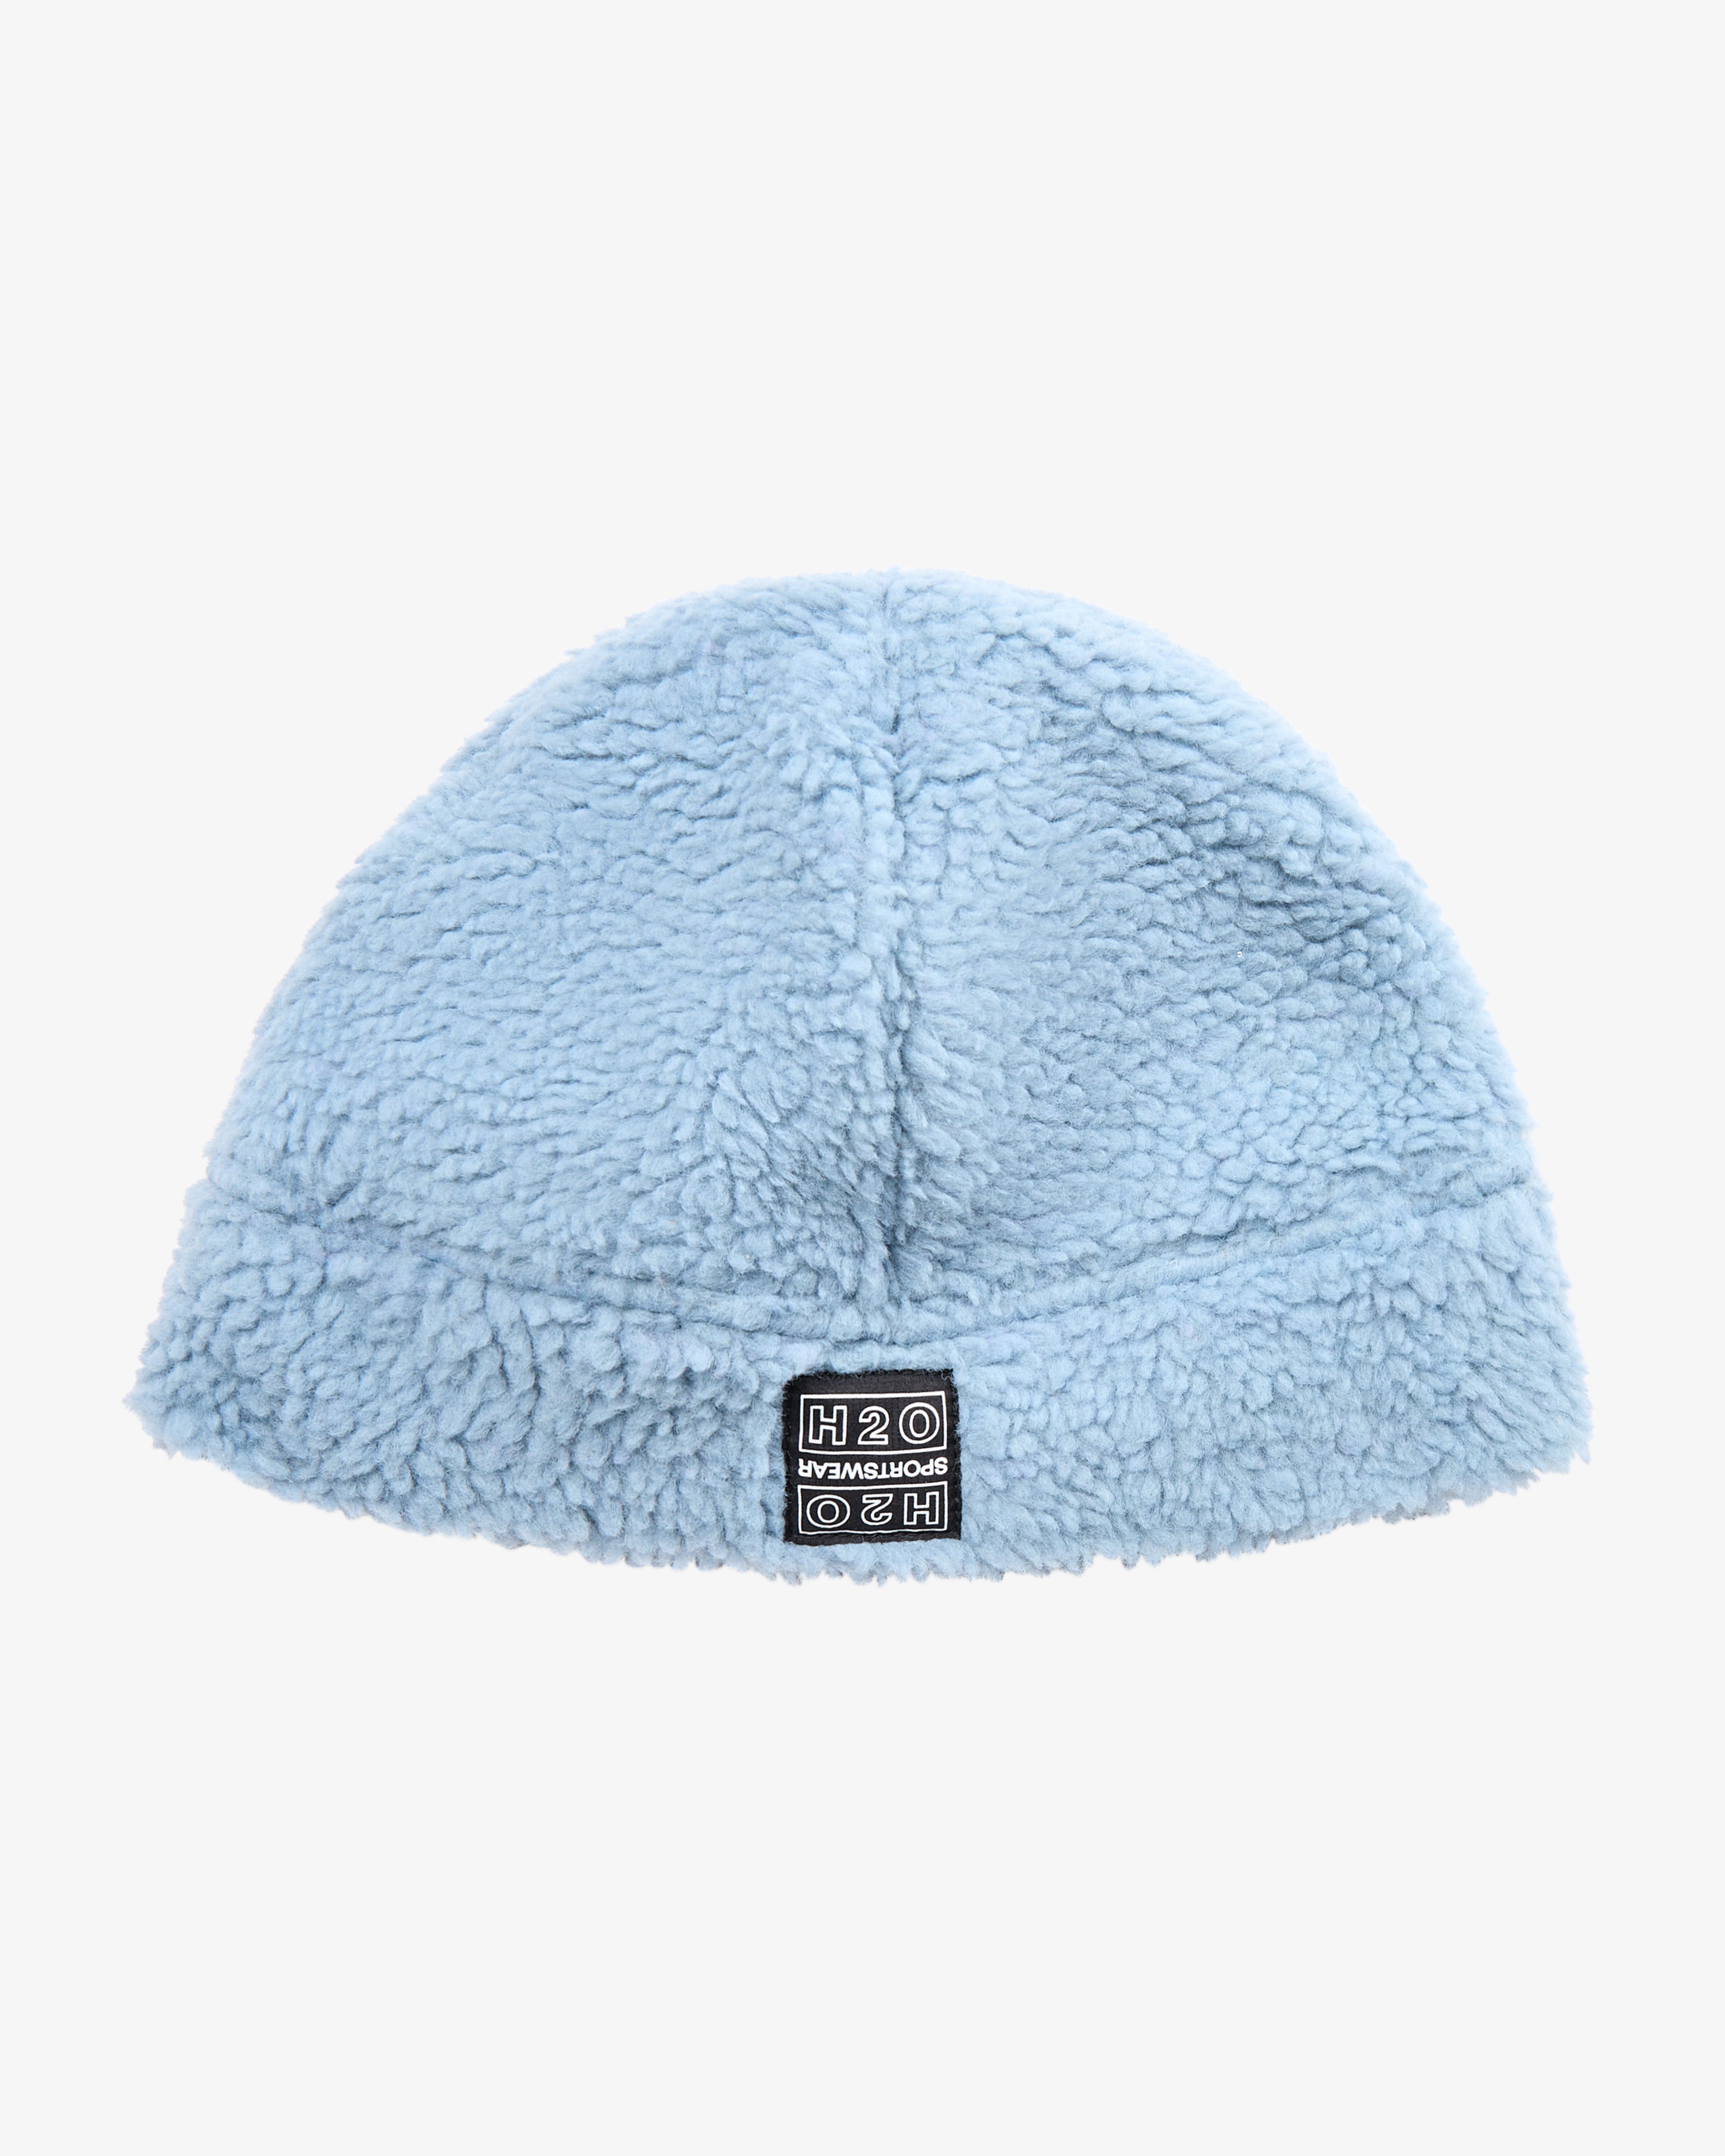 H2O Langli Pile Hat Accessories 2541 Stone Blue